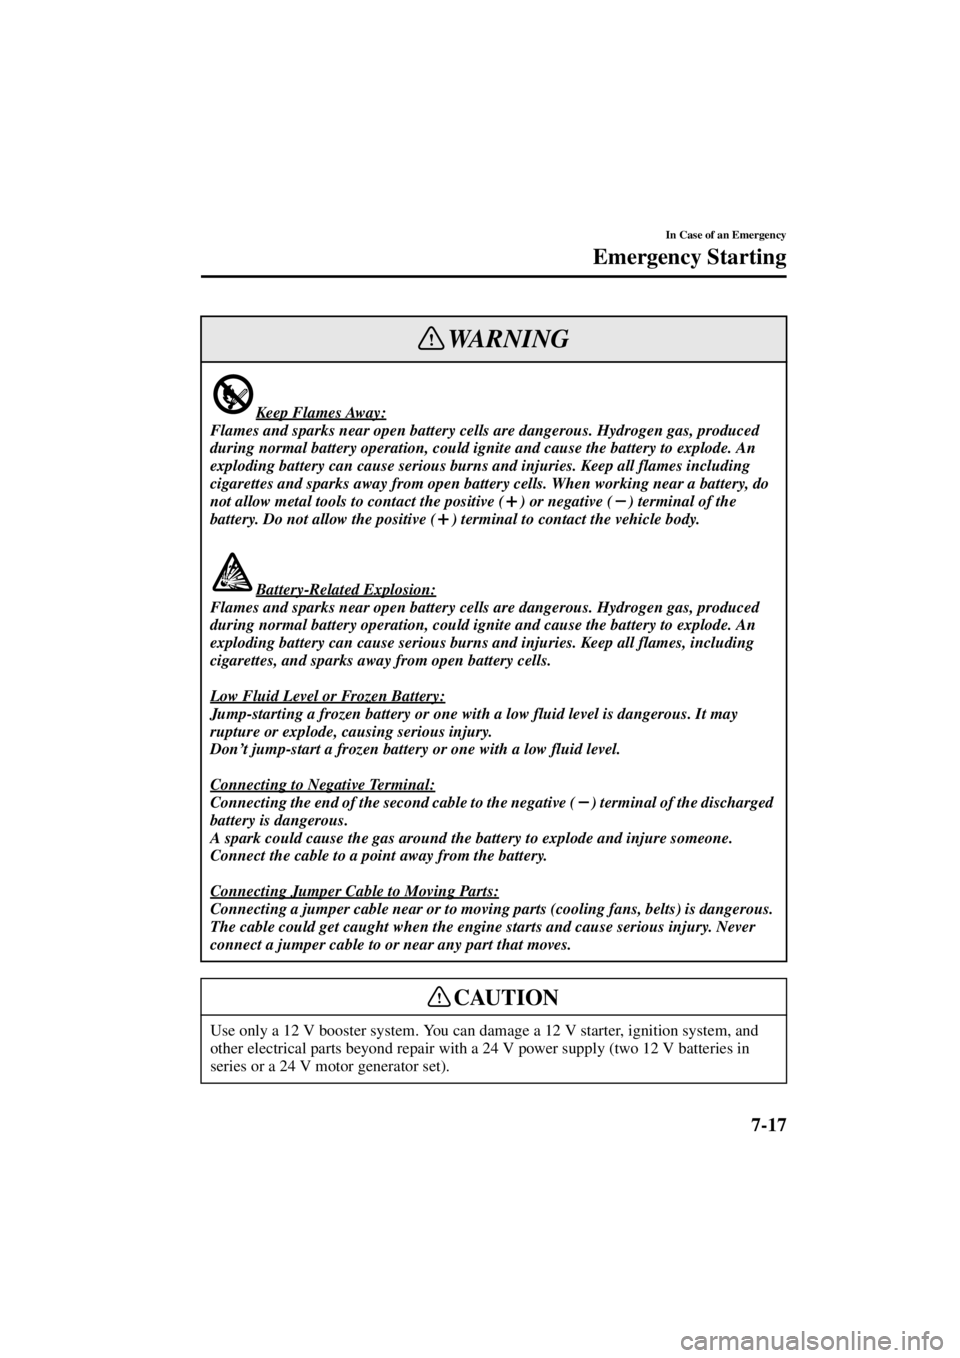 MAZDA MODEL 3 4-DOOR 2004  Owners Manual 7-17
In Case of an Emergency
Emergency Starting
Form No. 8S18-EA-03I
Keep Flames Away:
Flames and sparks near open battery cells are dangerous. Hydrogen gas, produced 
during normal battery operation,